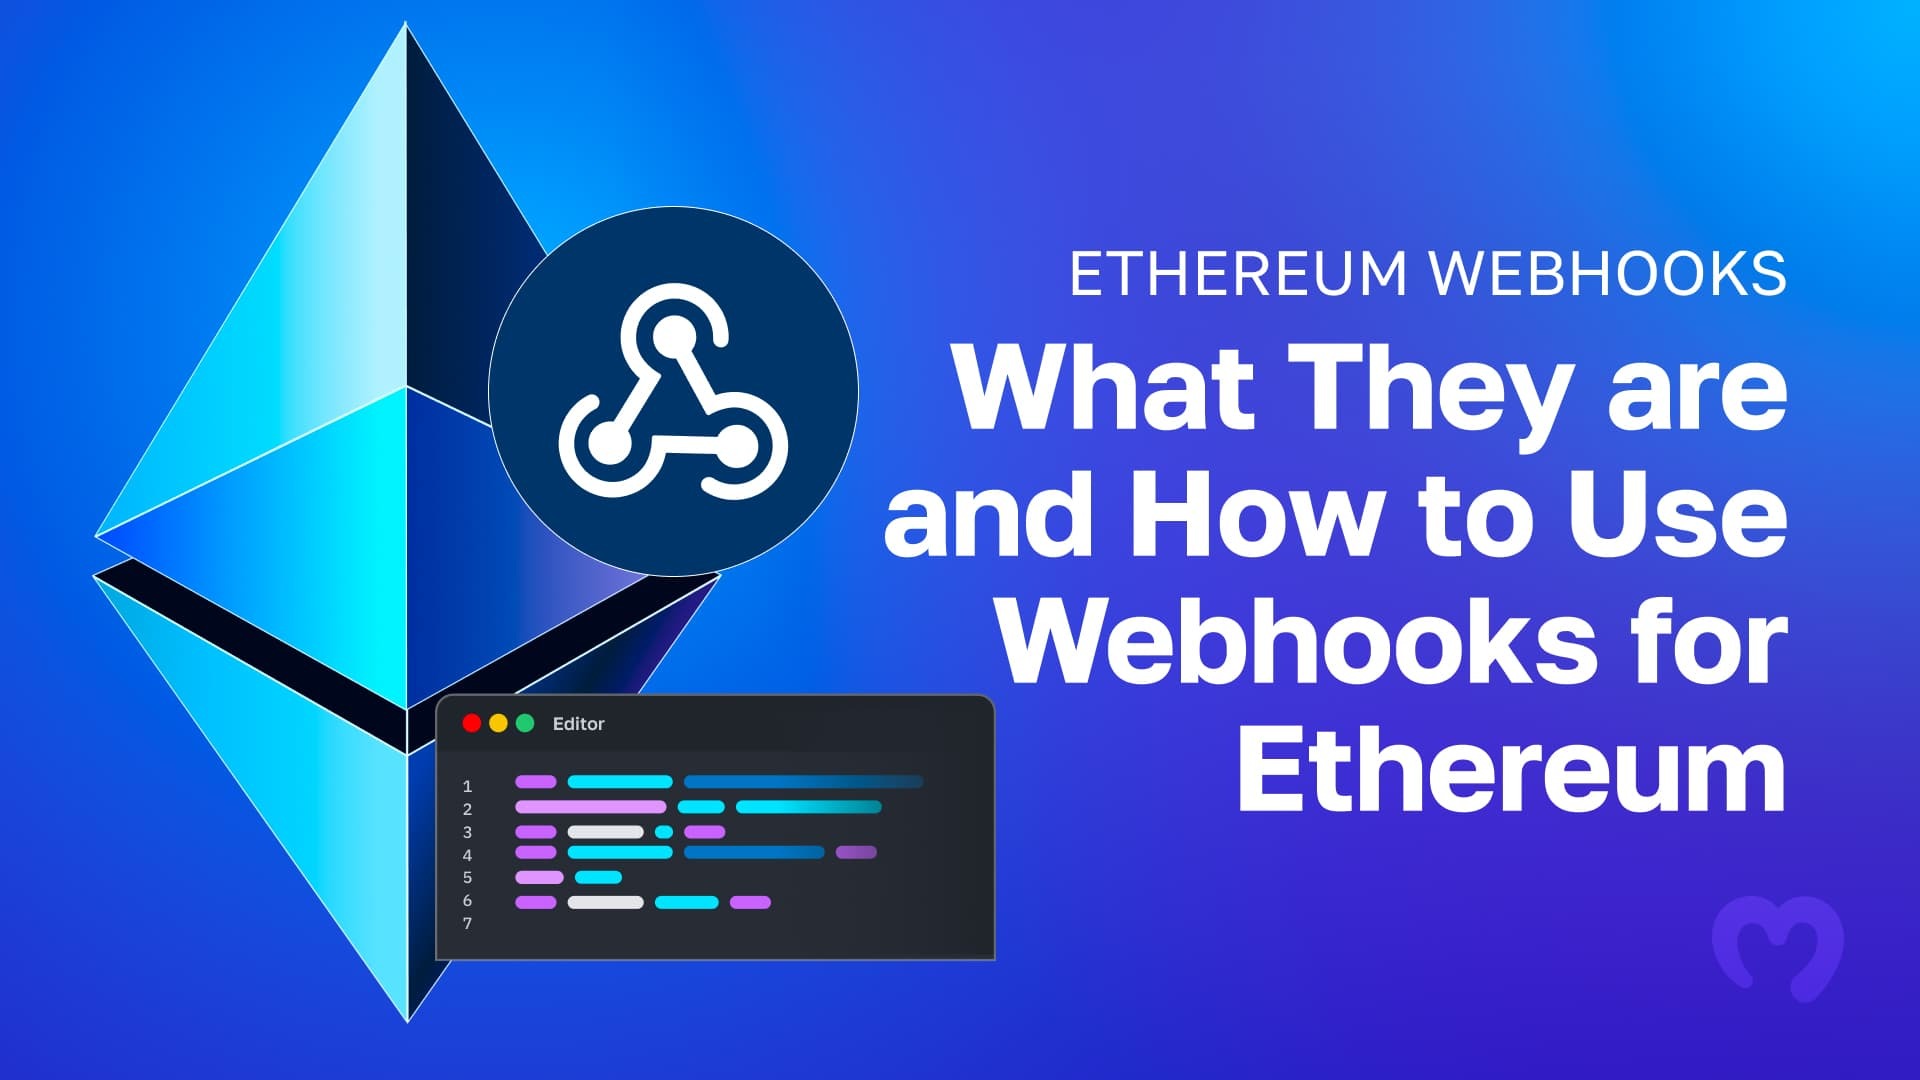 Ethereum logo and code editor in the background with a text that says Ethereum Webhooks - What They are and How to Use Webhooks for Ethereum.